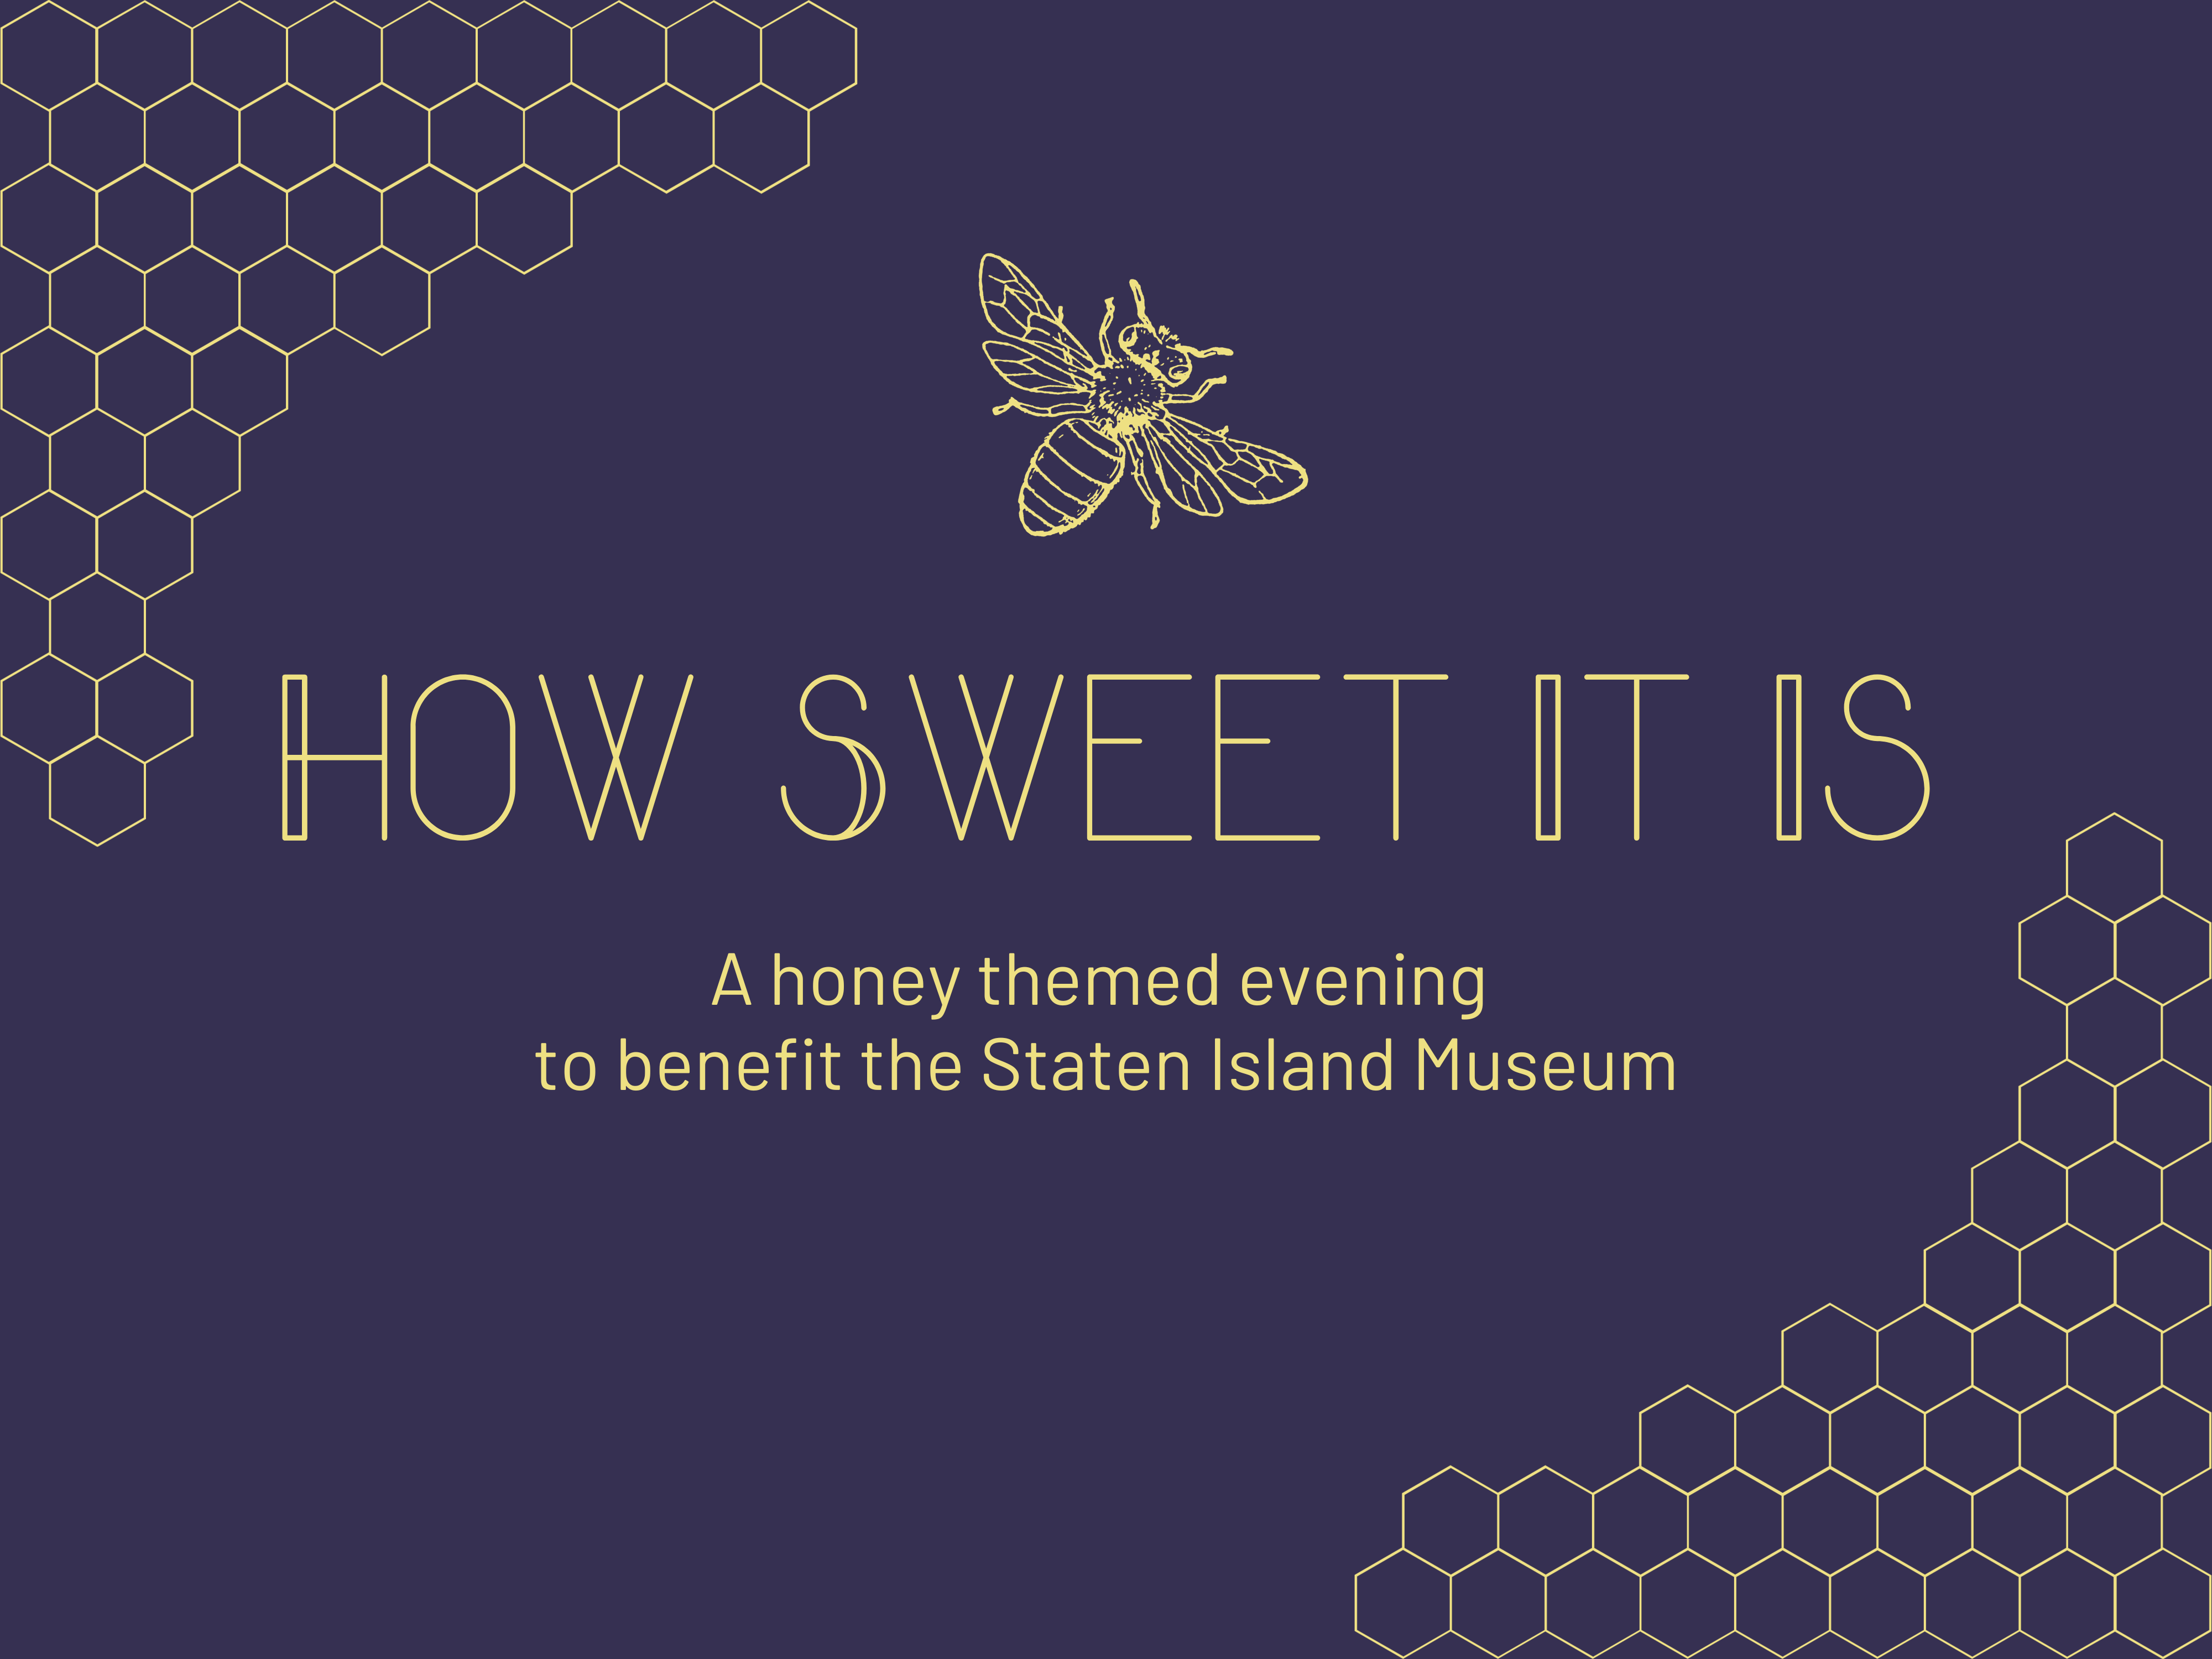 How Sweet Is - a honey themed evening to benefit the Staten Island Museum